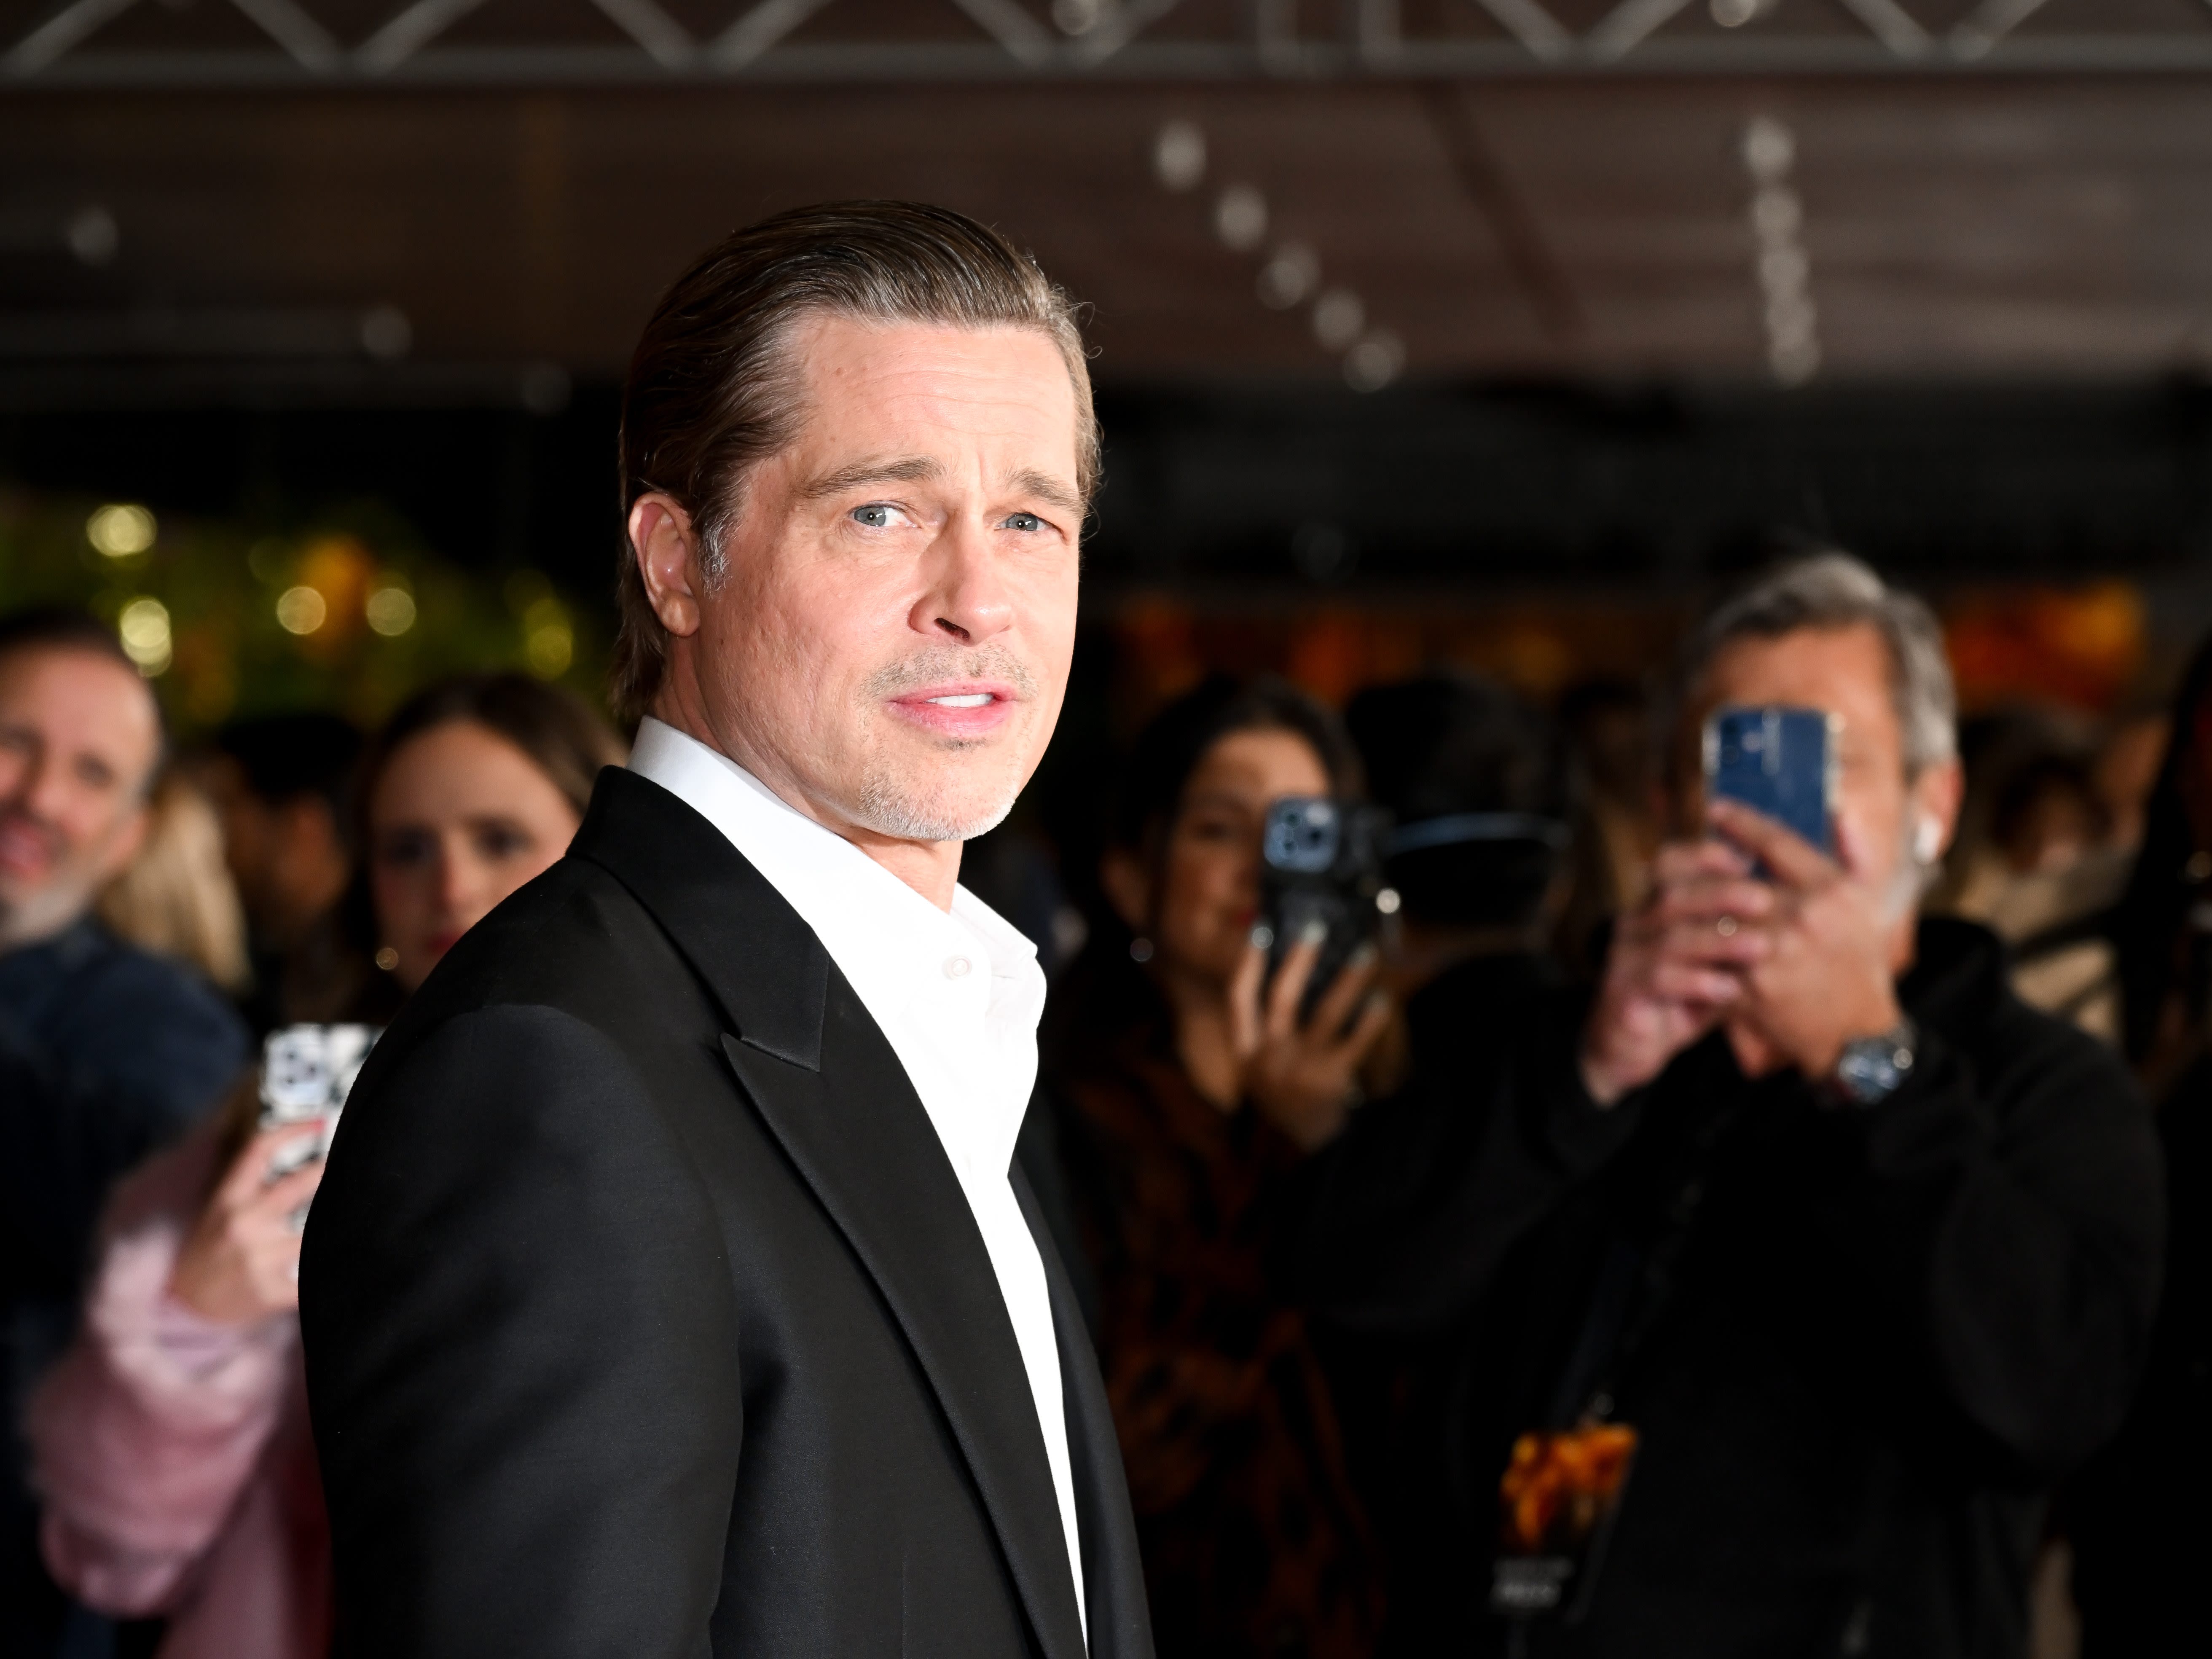 Sources Reveal the One Reason Brad Pitt Sees His Kids, Which Hints at Their Tattered Relationship